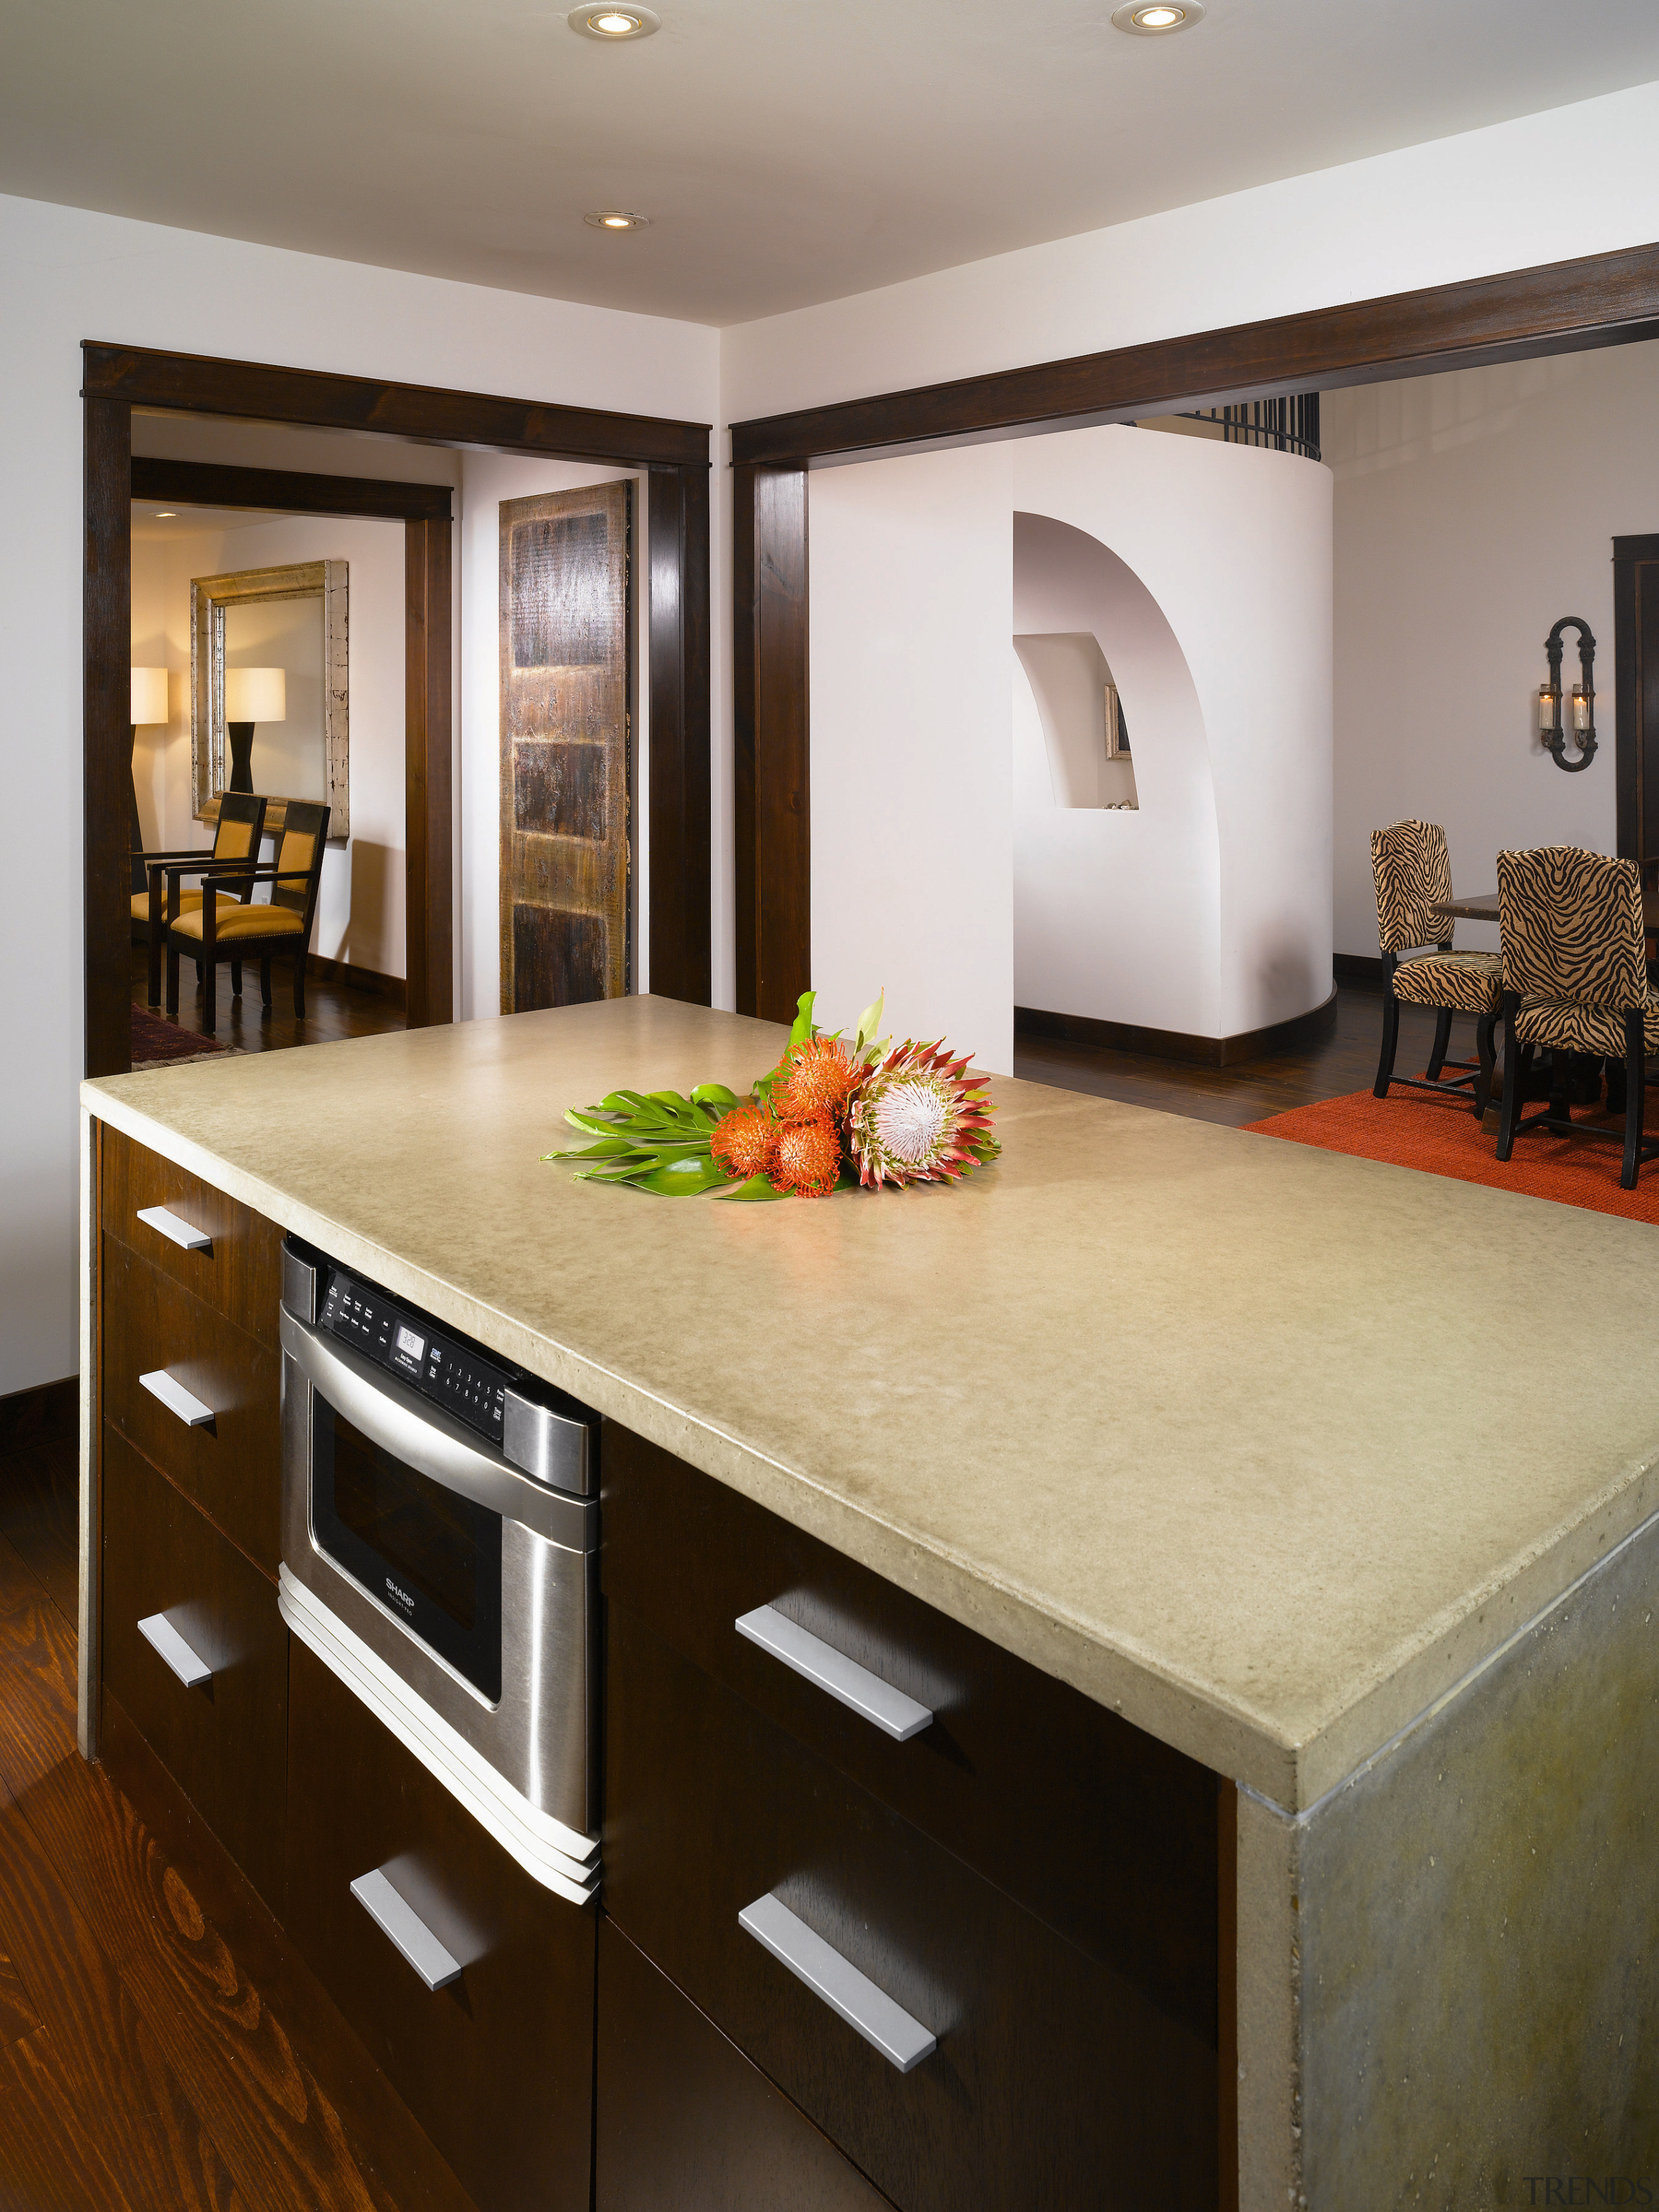 Part of the reason for the success of countertop, floor, flooring, interior design, kitchen, table, gray